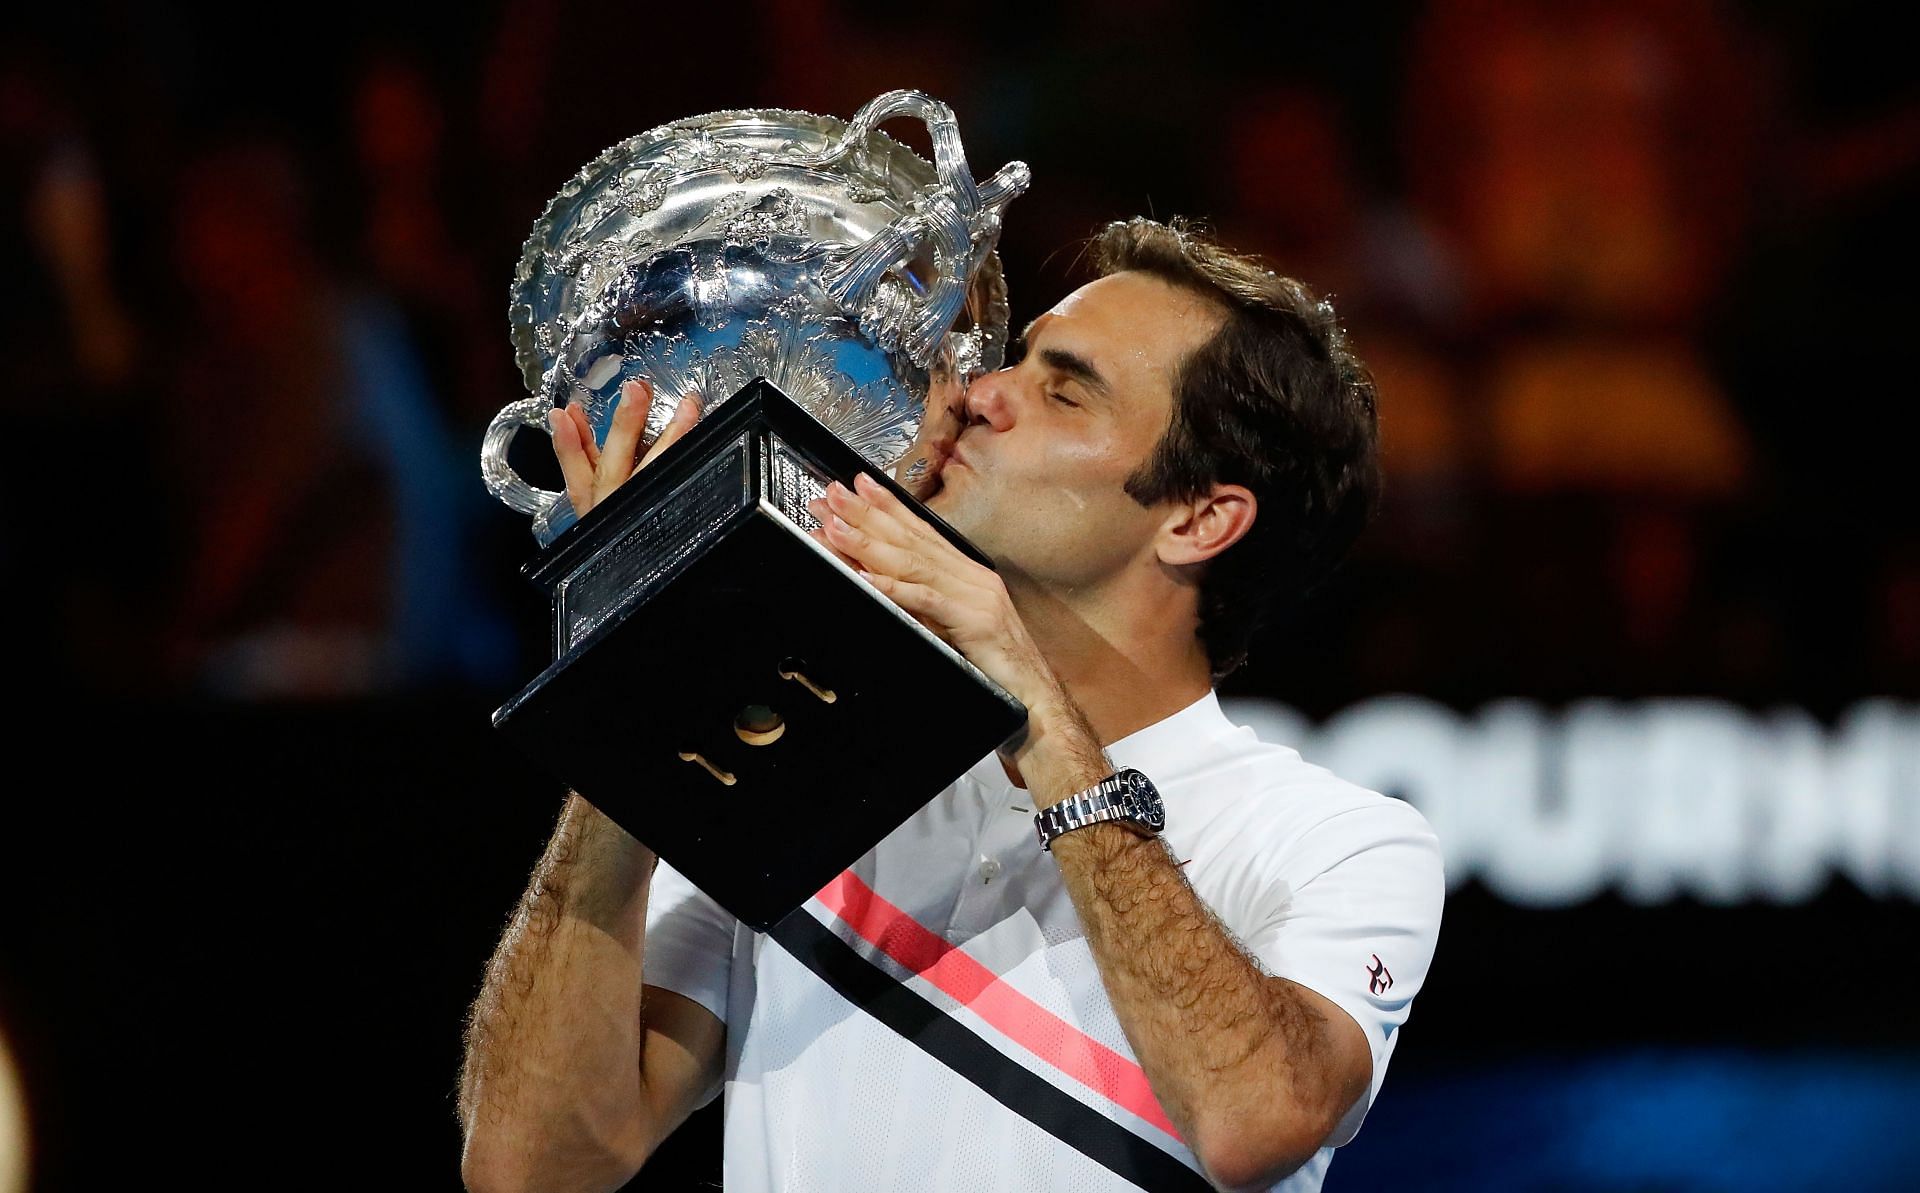 Federer has won the title six times.